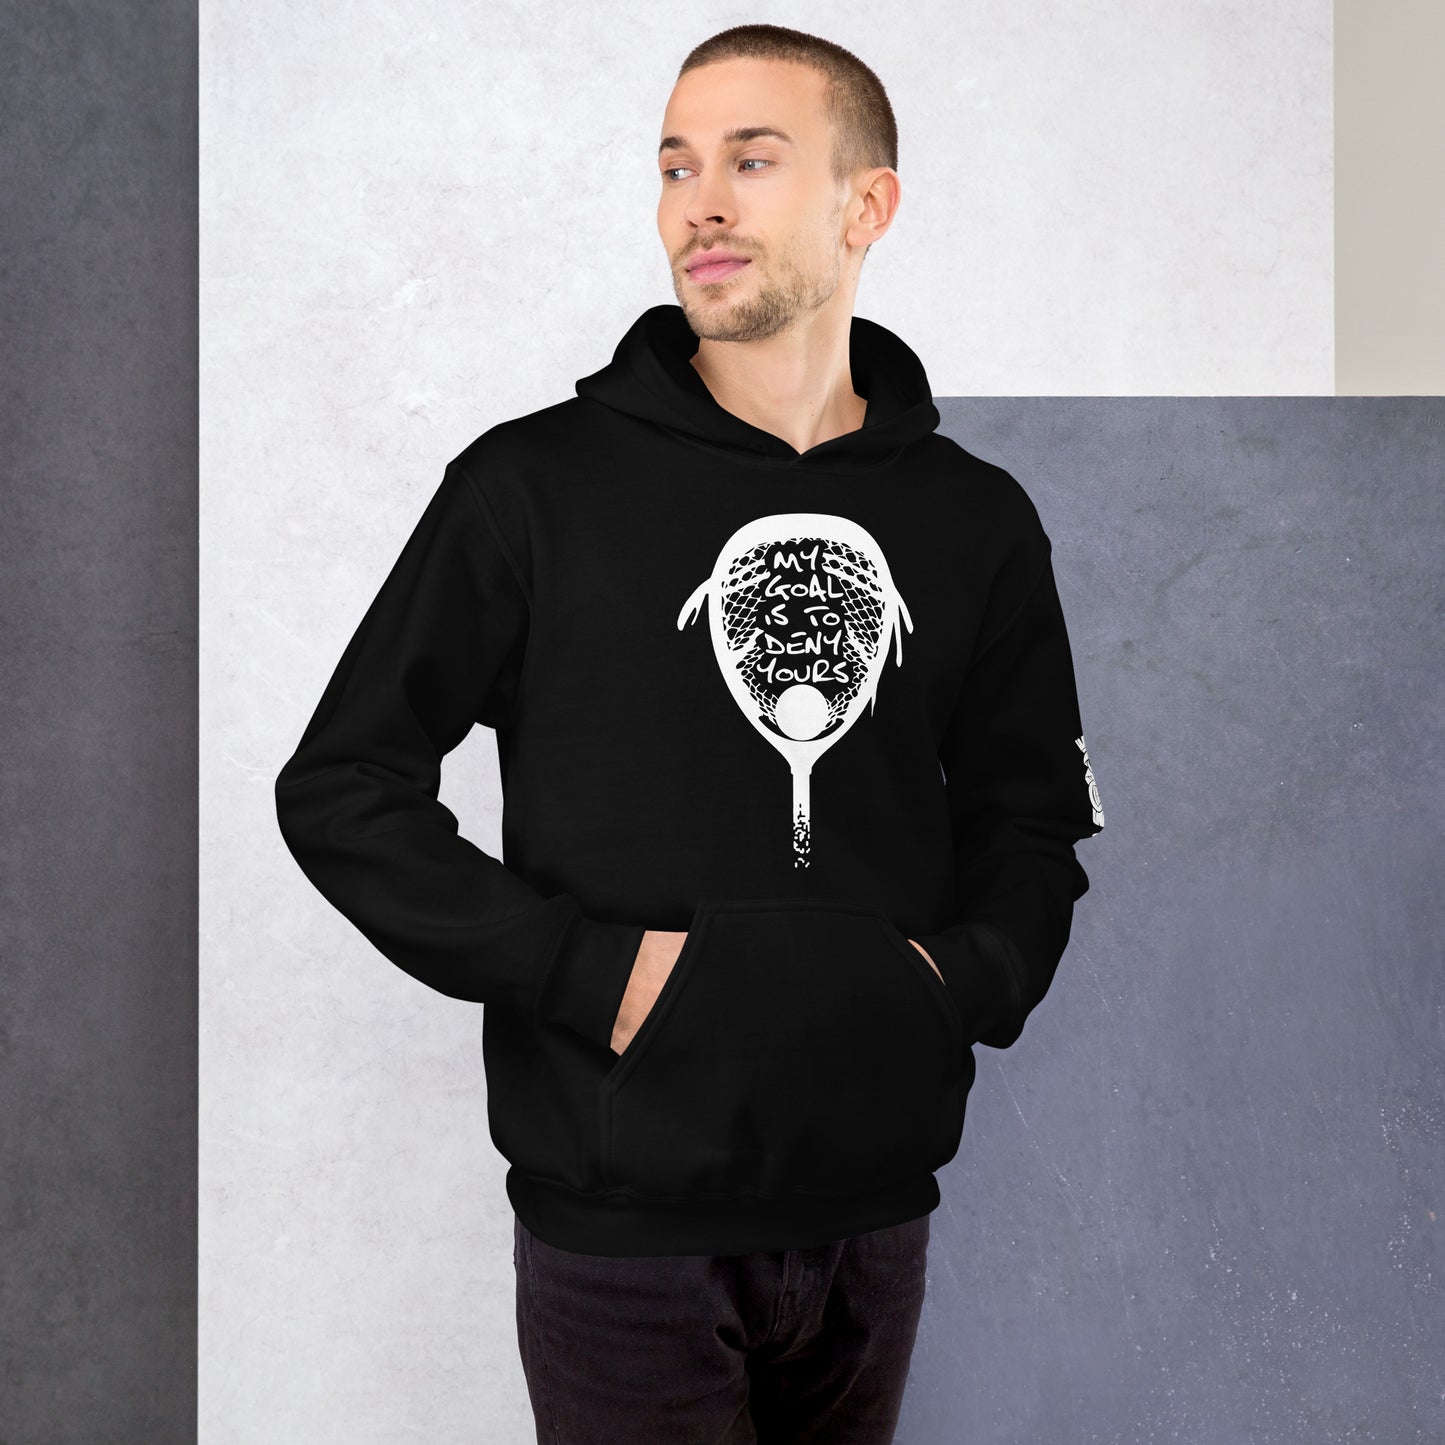 My goal is to deny yours lacrosse Unisex Hoodie